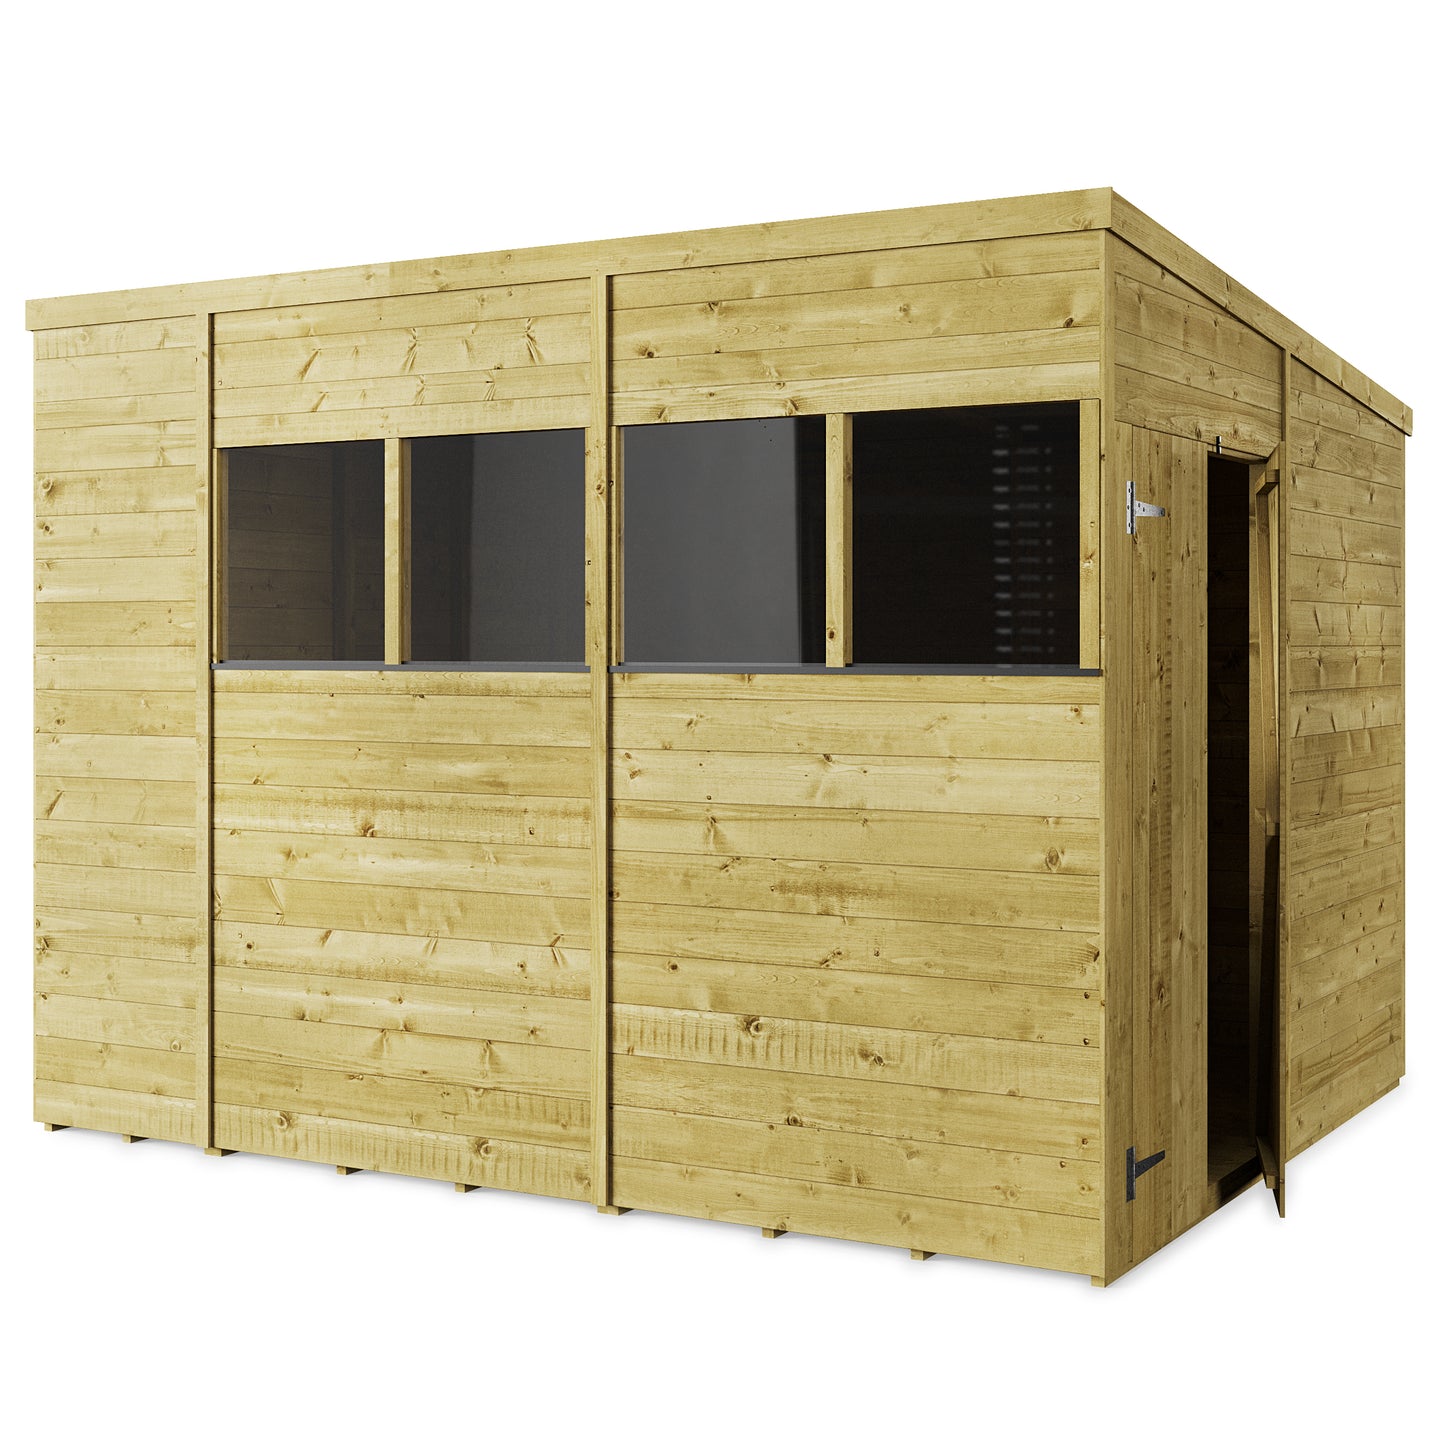 Store More 10 x 8 Tongue and Groove Pent Shed Windowed - Premium Garden